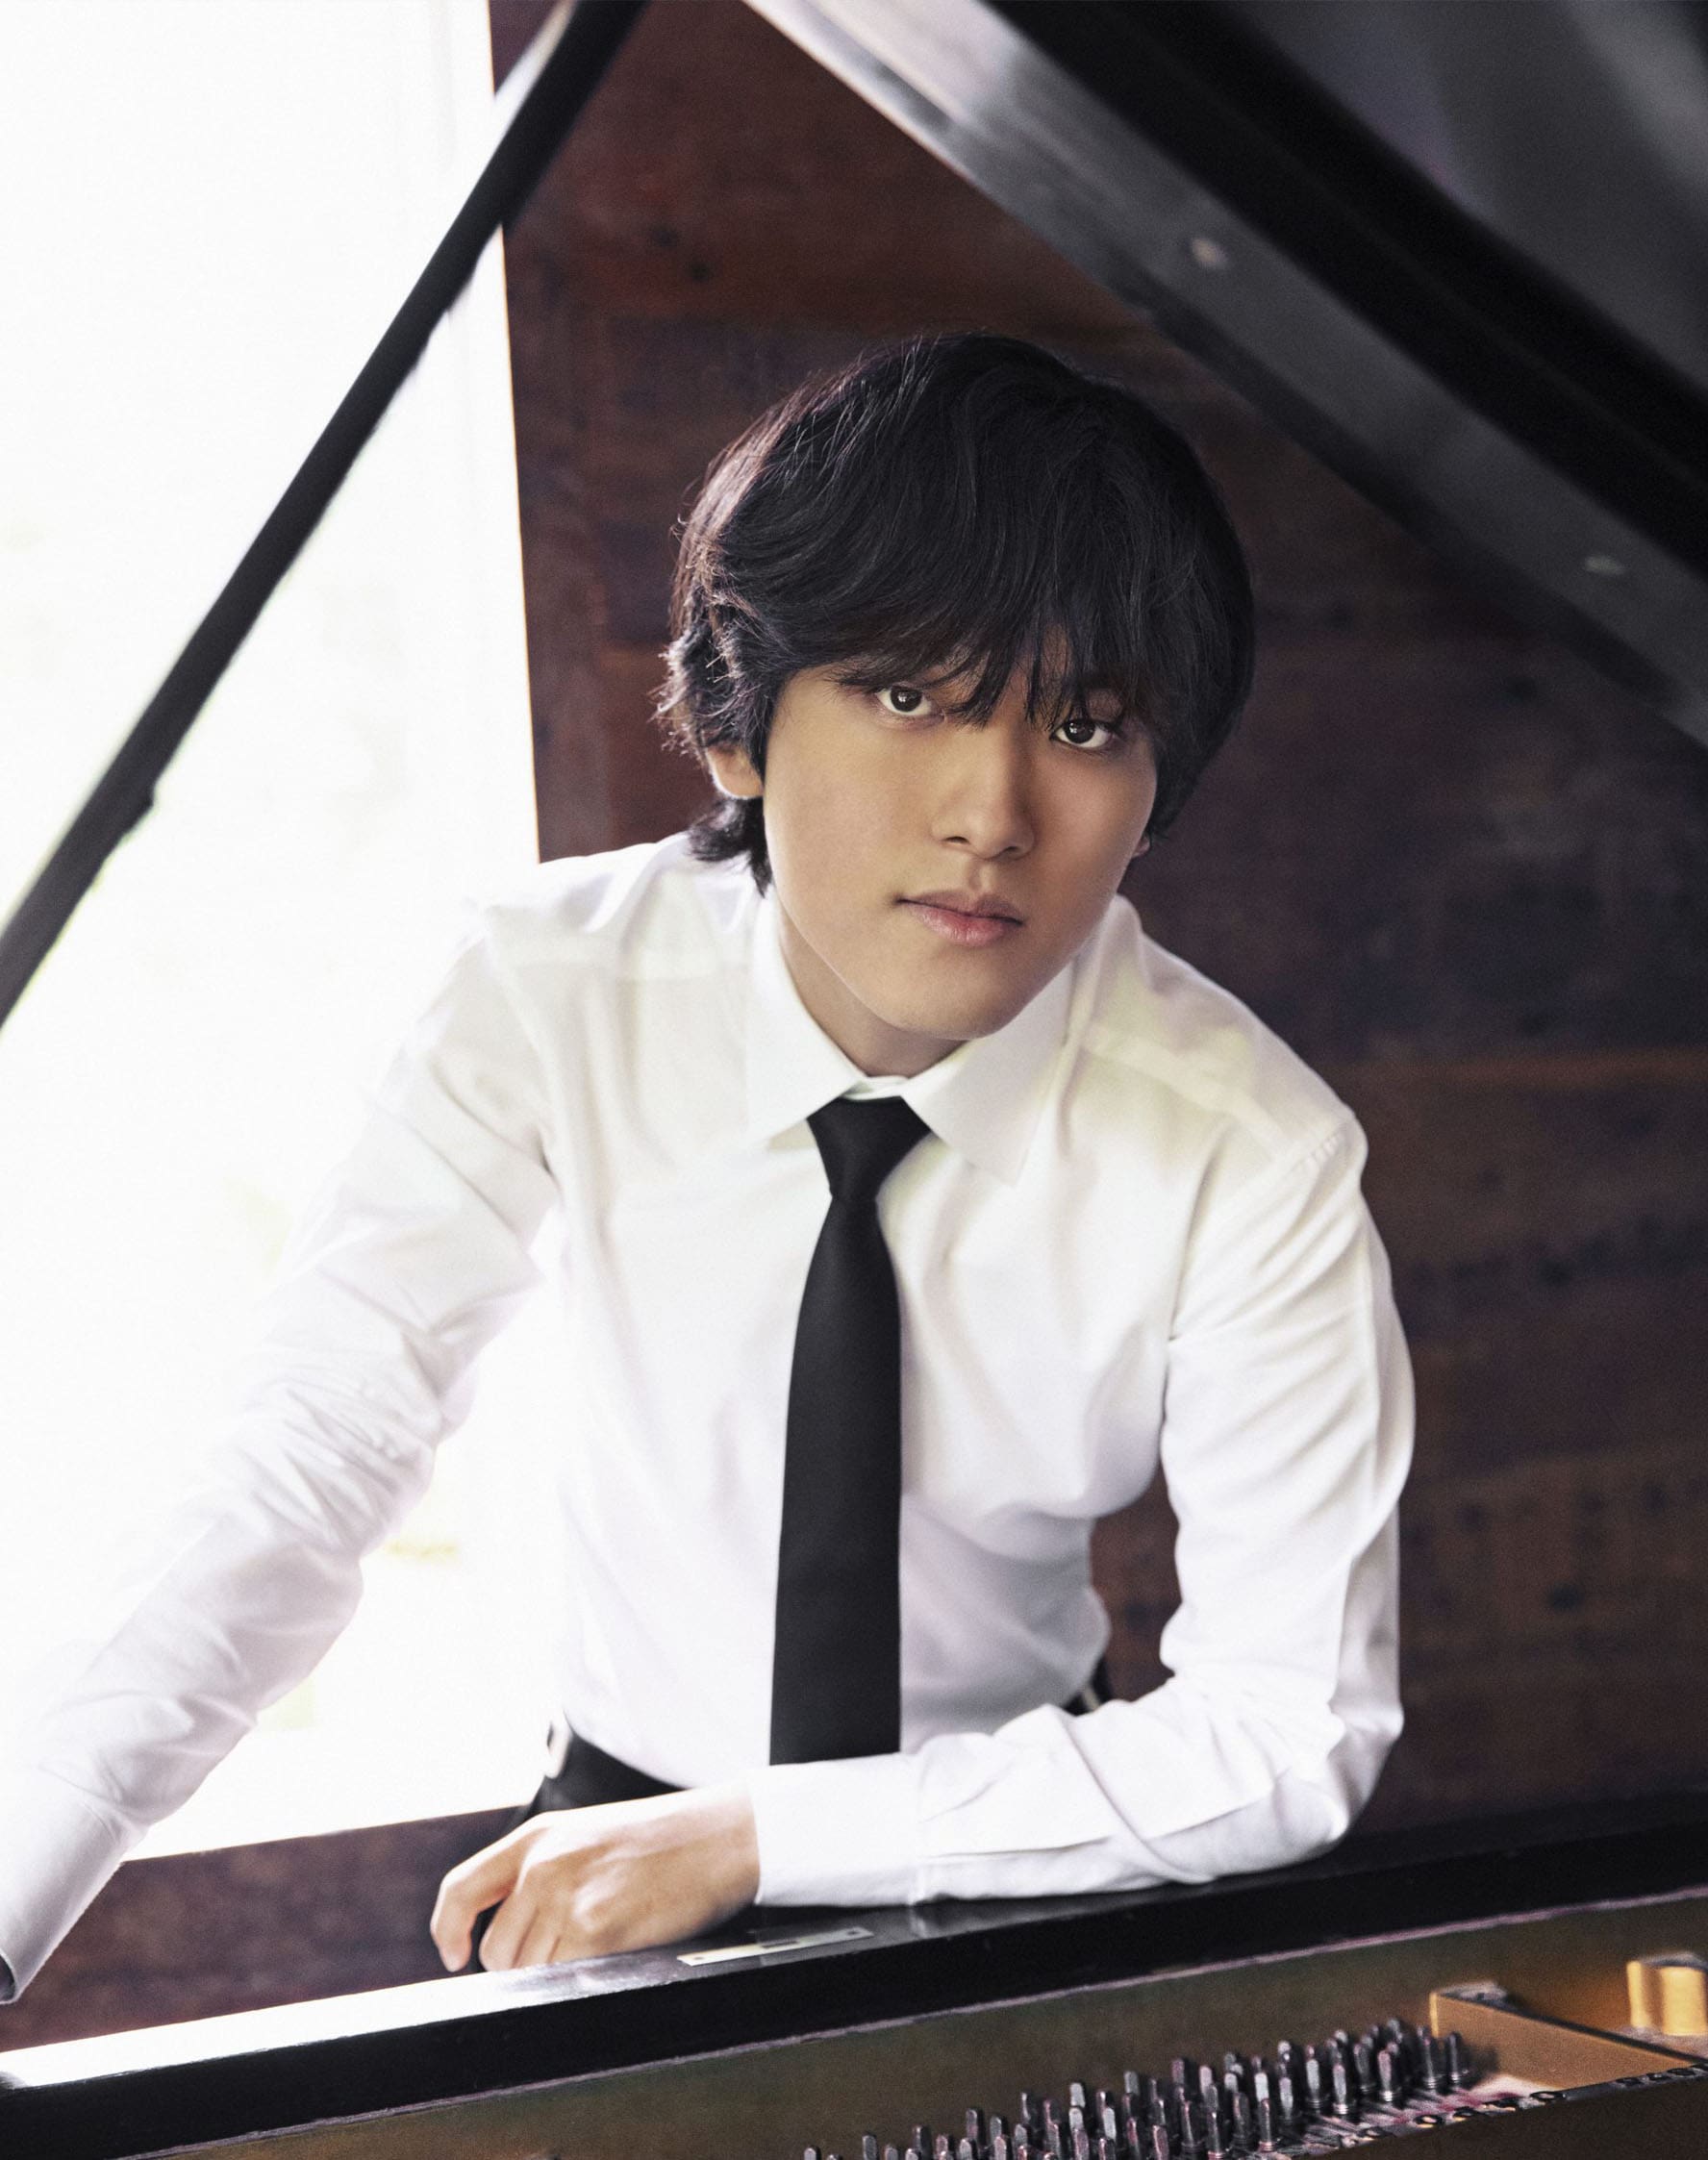 Yunchan Lim leaning on a piano.